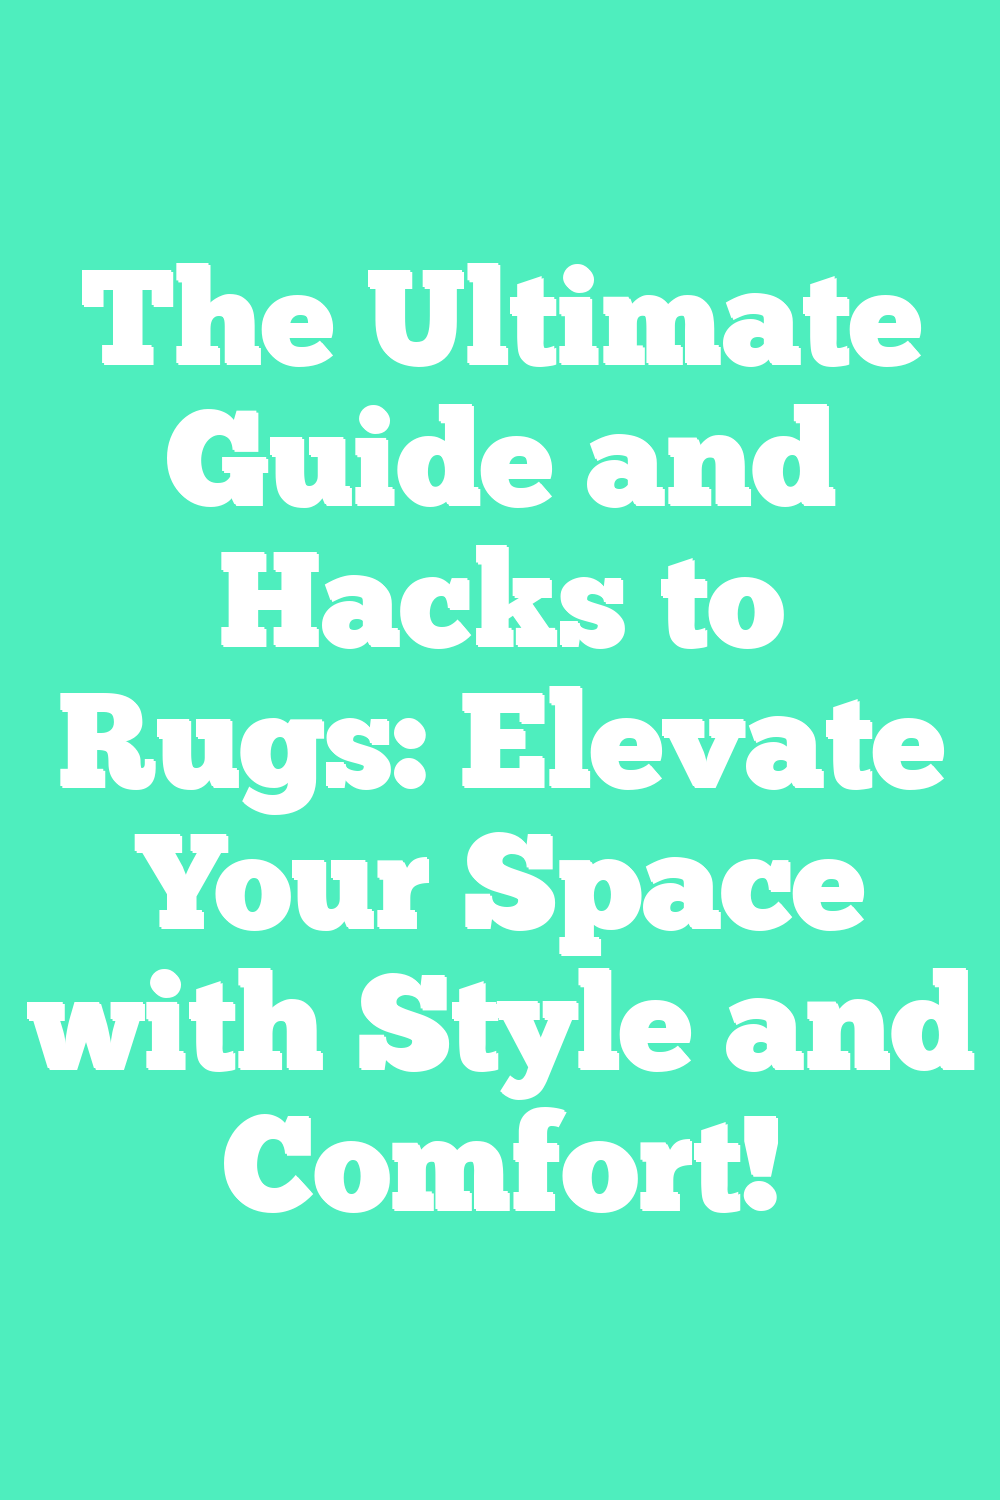 The Ultimate Guide and Hacks to Rugs: Elevate Your Space with Style and Comfort!